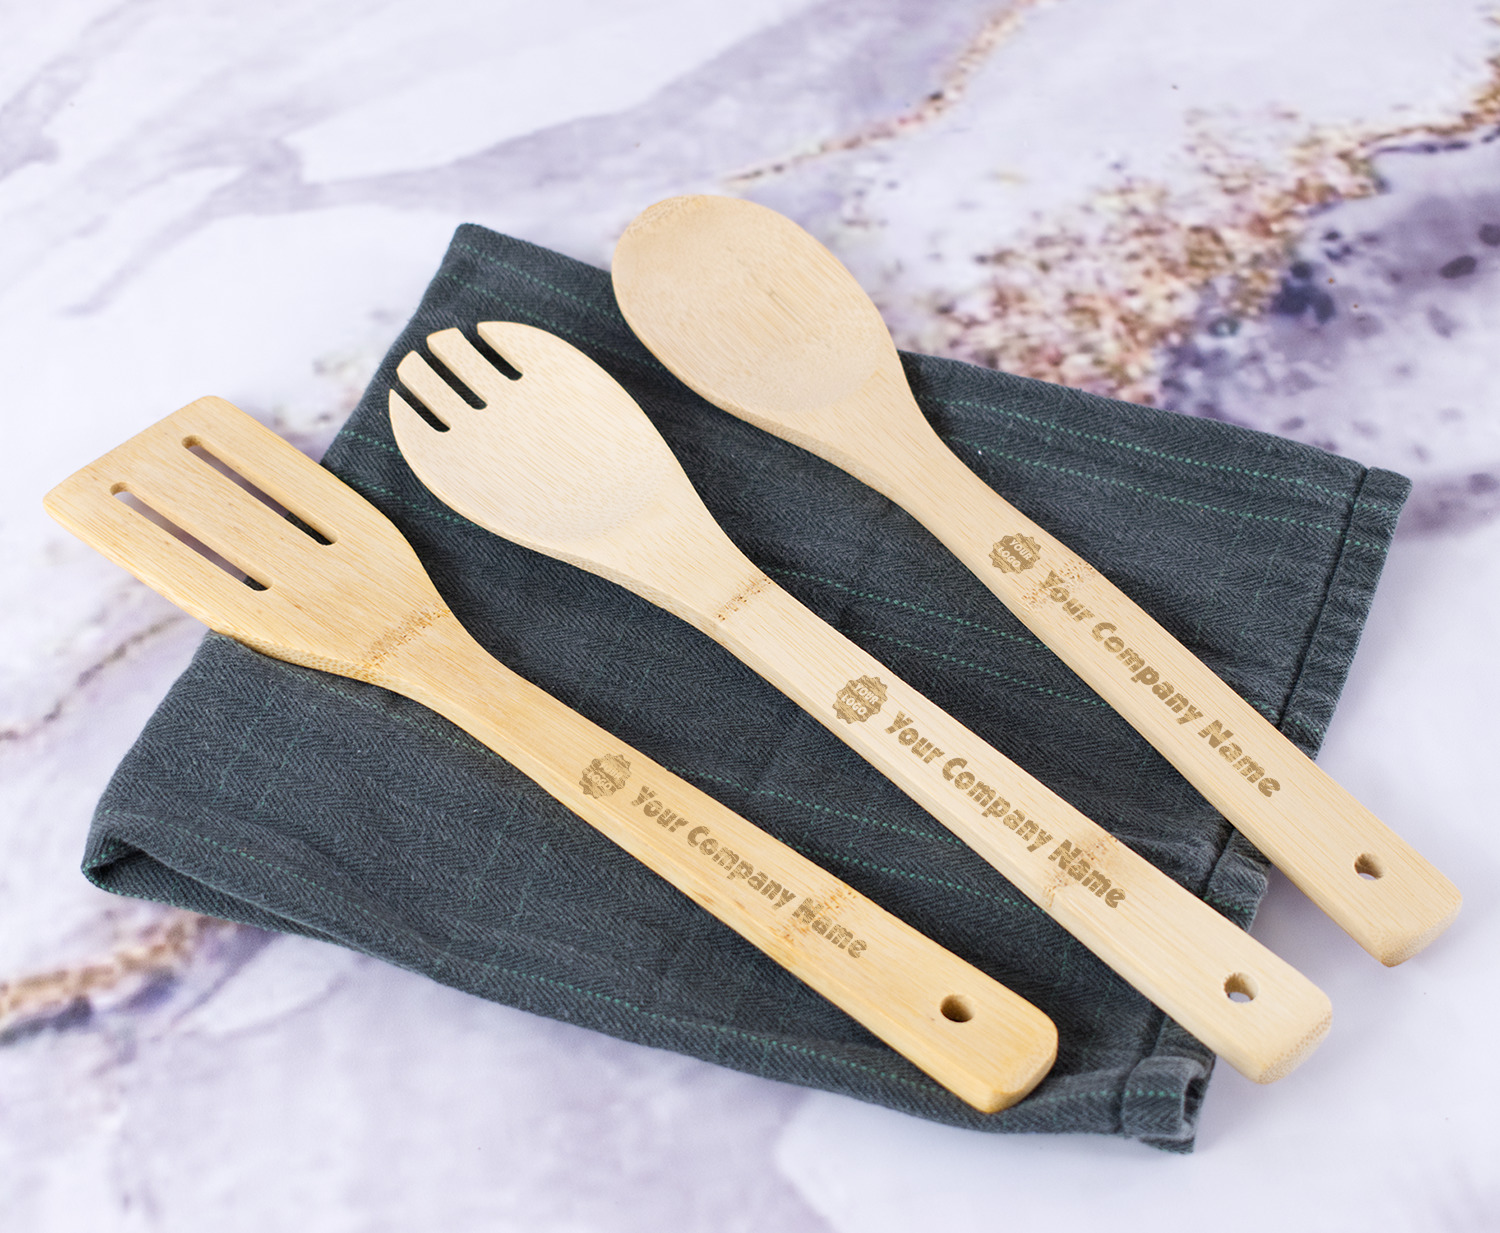 https://www.youcustomizeit.com/common/MAKE/638421/Logo-Company-Name-Bamboo-Cooking-Utensils-Set-In-Context.jpg?lm=1686953854